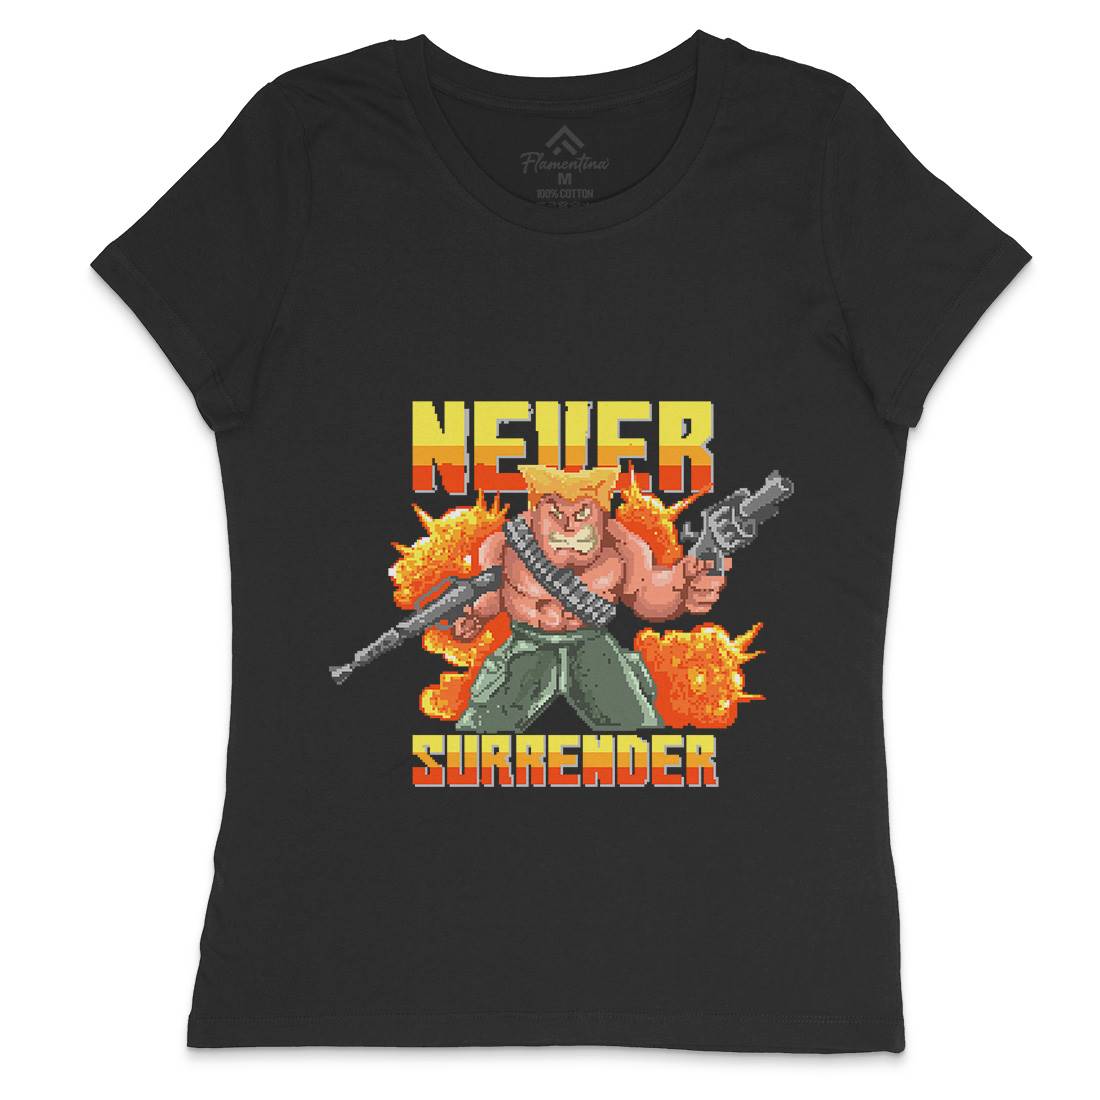 Never Surrender Womens Crew Neck T-Shirt Army B939